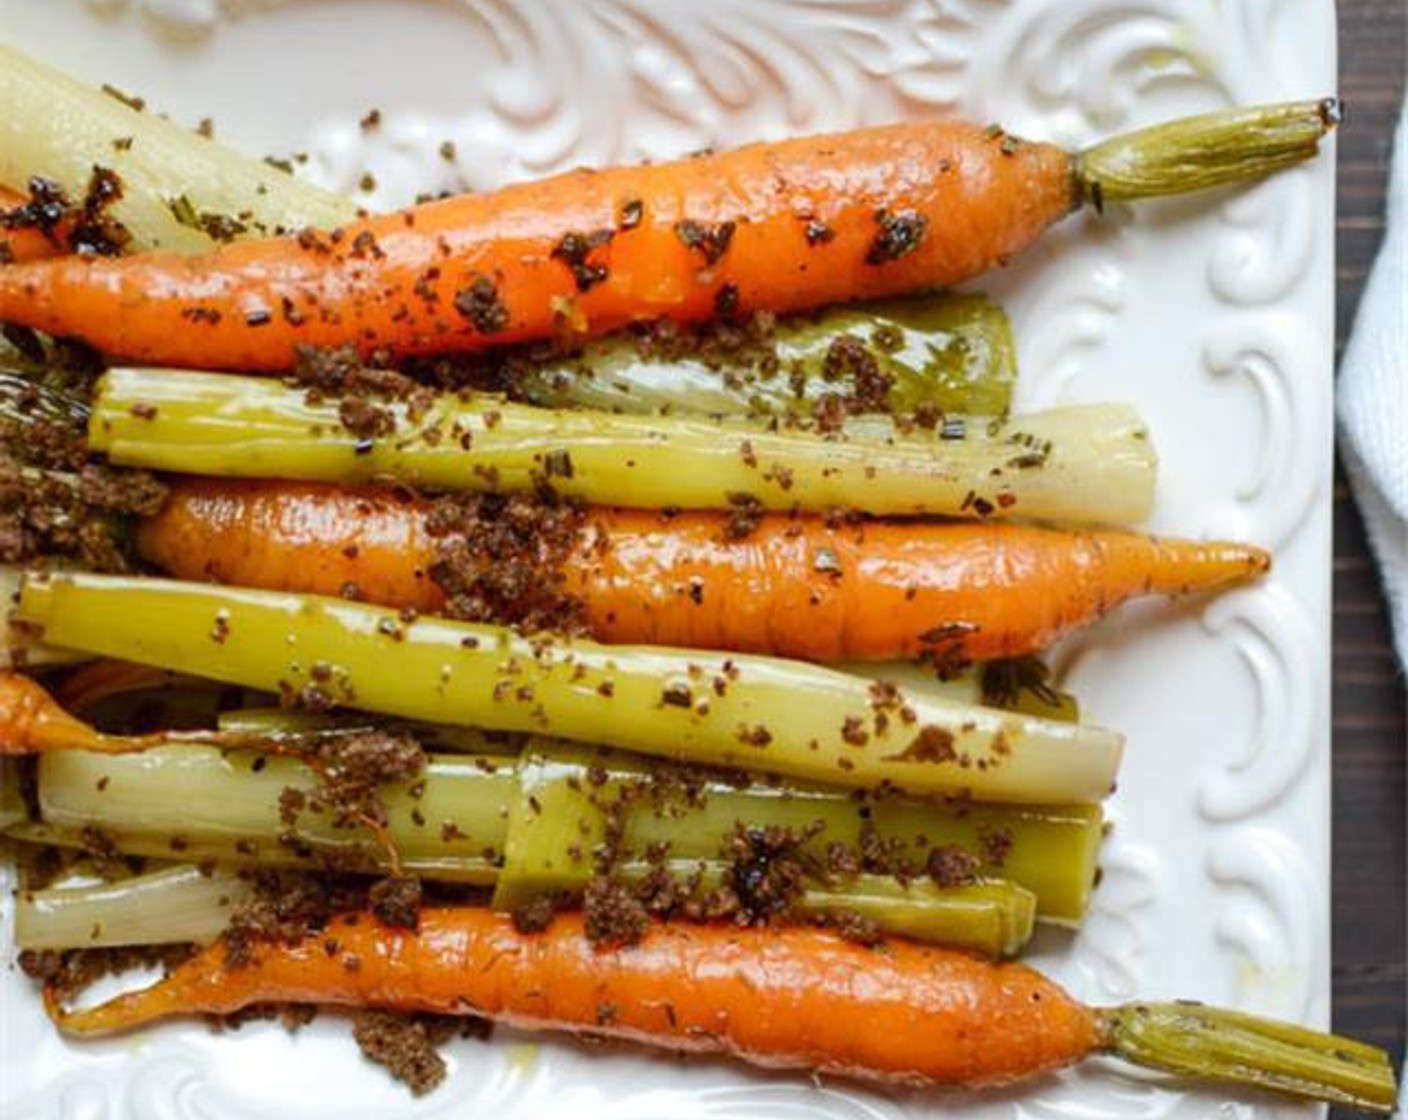 Braised Leeks and Carrots with Toasted Crumble